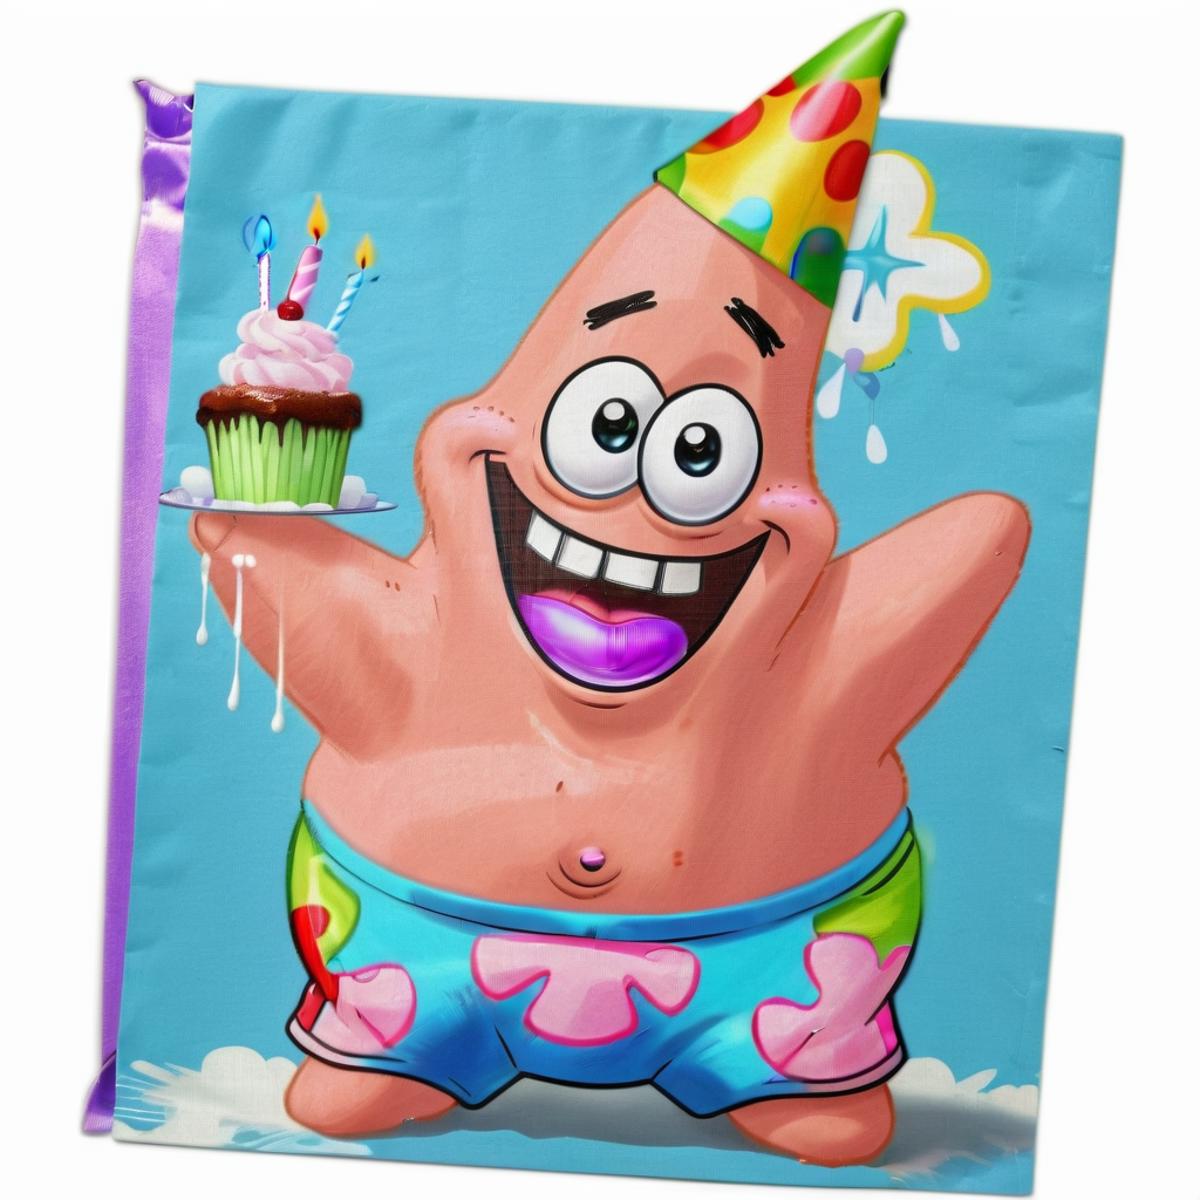 Patrick Star XL image by 3VOLUTION